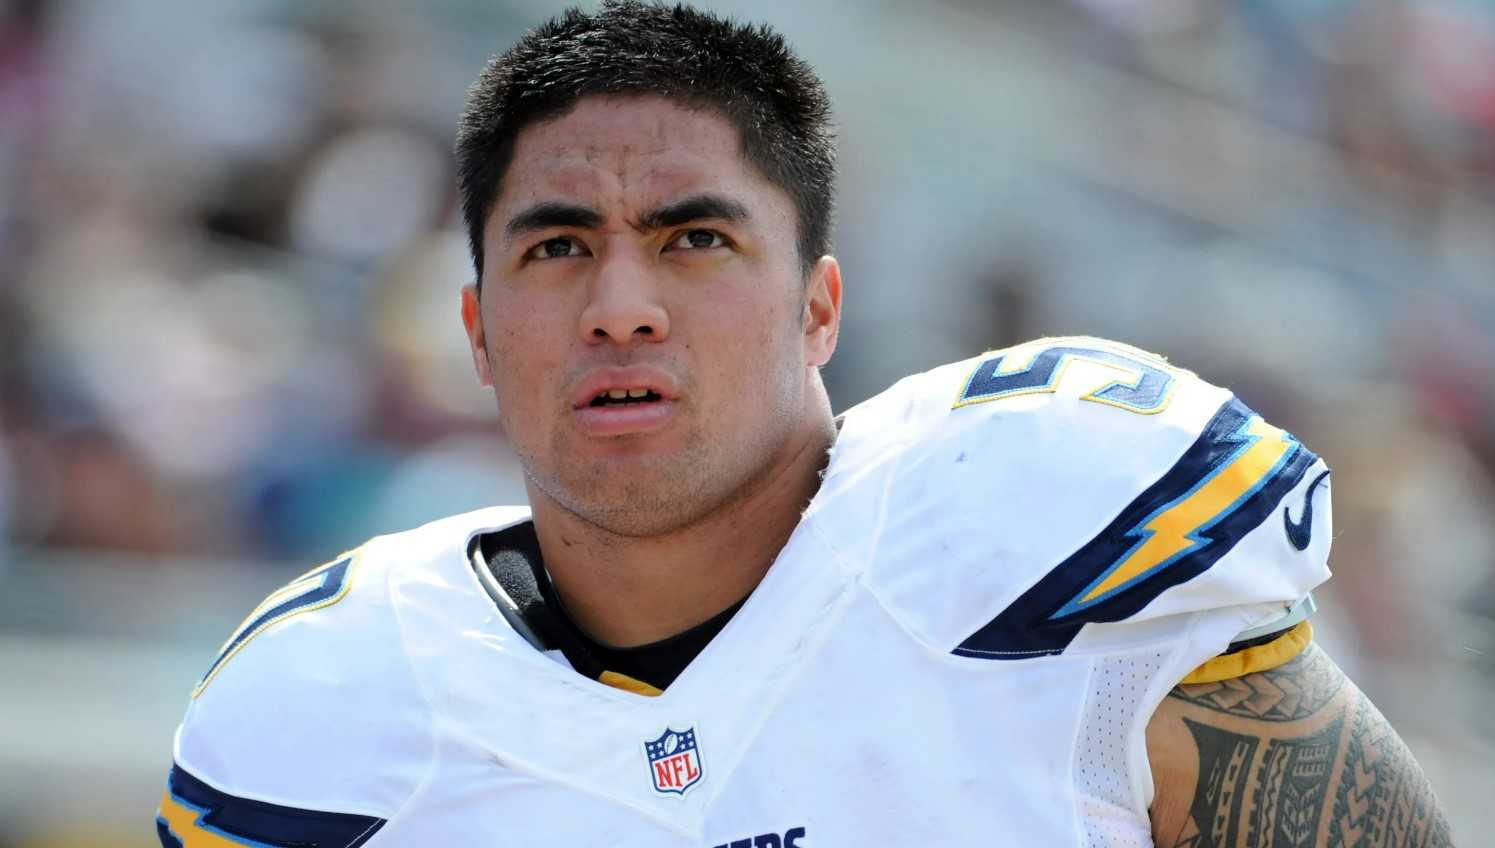 manti teo wife,how much did manti teo get paid for netflix,what is manti teo doing now,manti teo wife net worth,manti teo catfish,manti teo height,manti teo career earnings,manti te&#039;o wife,what is manti te&#039;o doing now,manti te&#039;o wife net worth,manti te&#039;o career earnings,manti te&#039;o current team,manti te&#039;o nfl career,manti te&#039;o net worth,manti te&#039;o net worth 2021,manti te&#039;o net worth netflix,manti te&#039;o net worth today,manti te&#039;o net worth 2019,notre dame manti te&#039;o net worth,does manti te&#039;o net worth,manti te o net worth 2022,manti te o net worth now,manti te o wife net worth,what&#039;s manti te&#039;o net worth,did manti te&#039;o net worth,manti te&#039;o net worth 2022,manti te o net worth,manti teo net worth